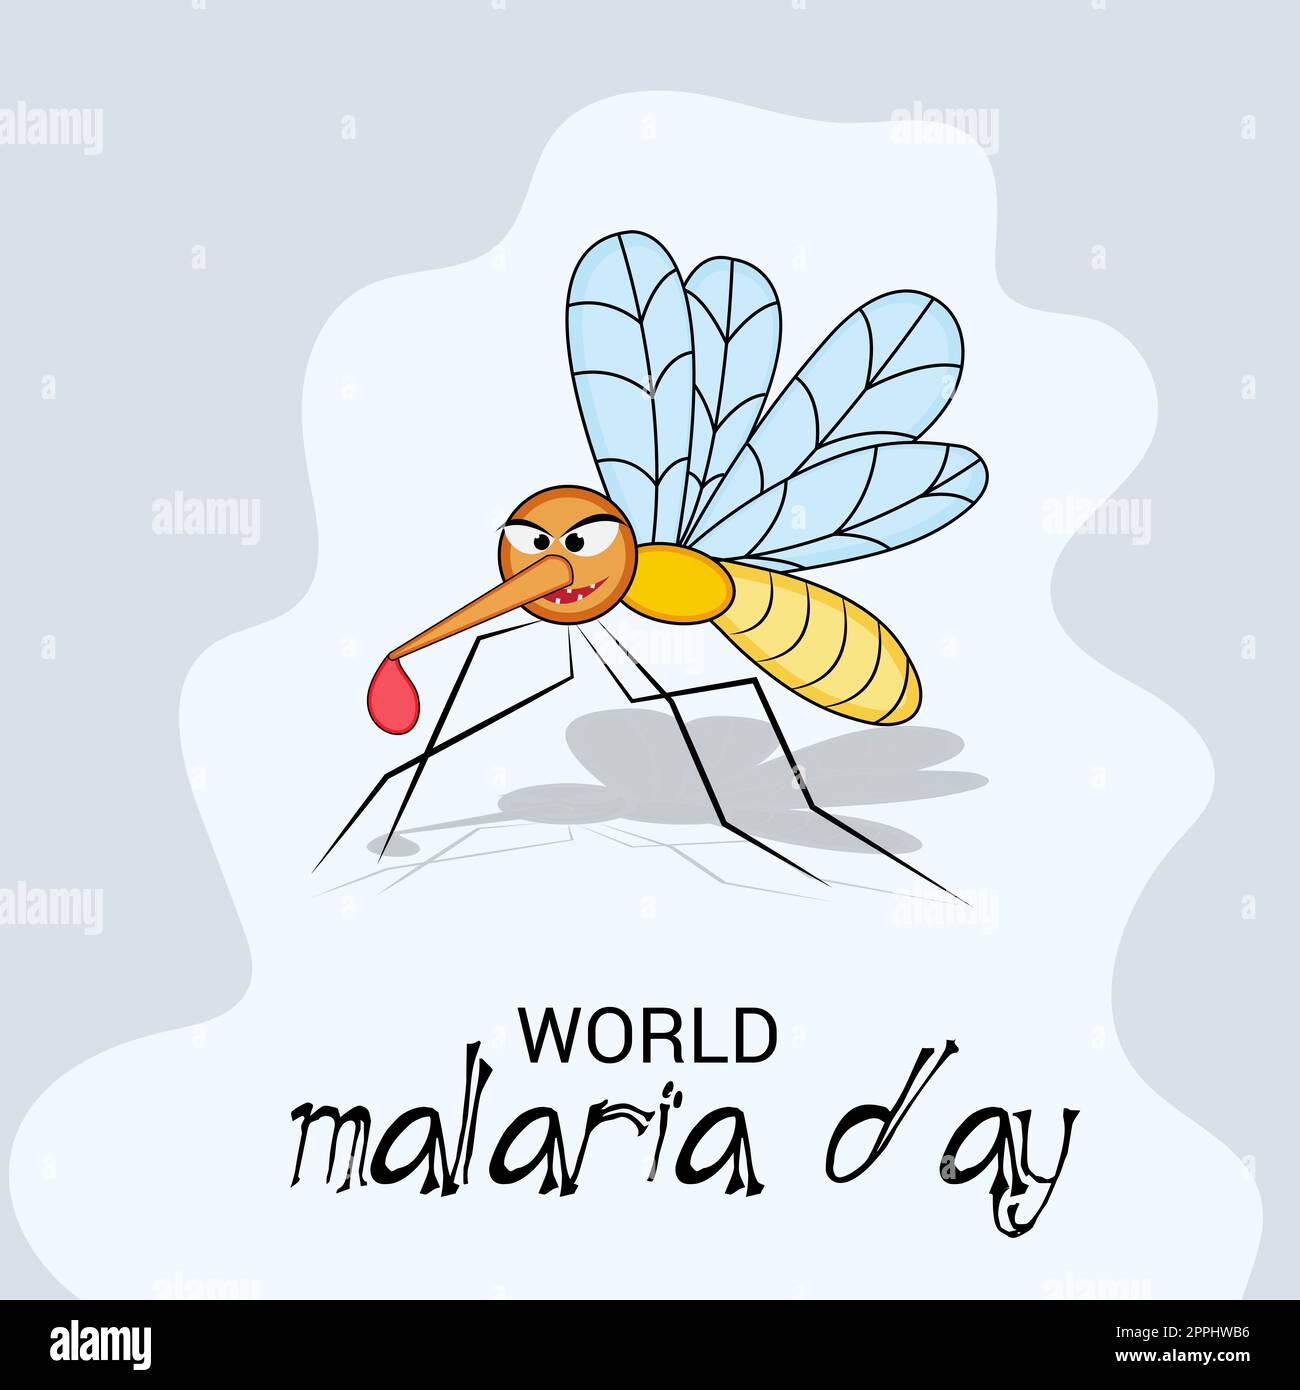 vector illustration of a background for world malaria day 2PPHWB6